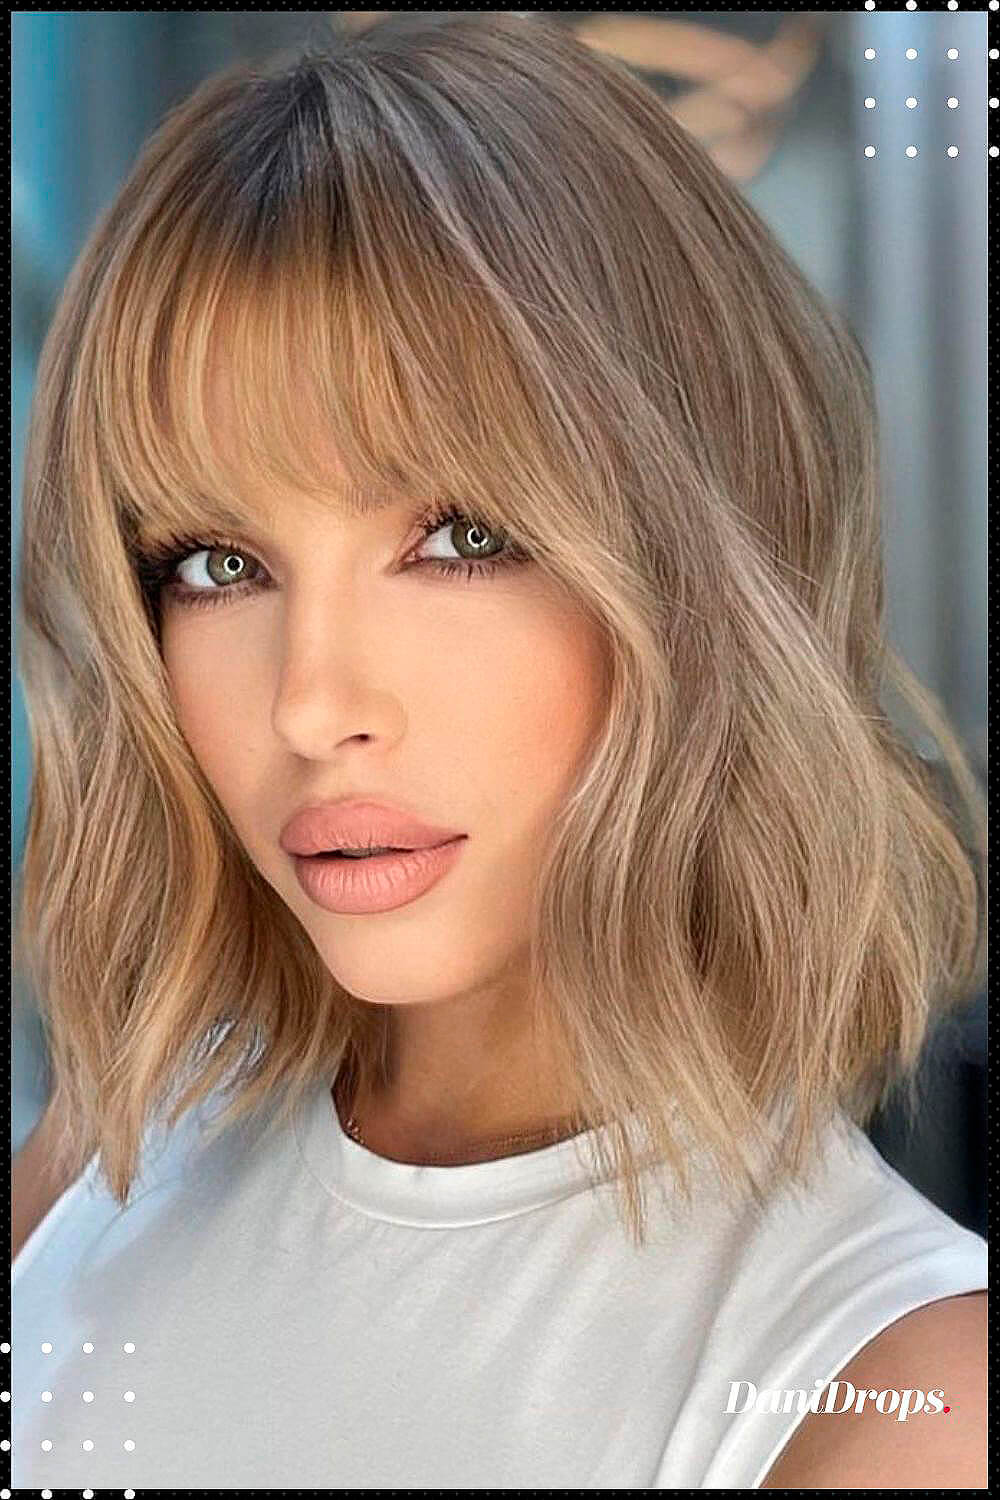 Top Haircuts and Styles for Oval Faces